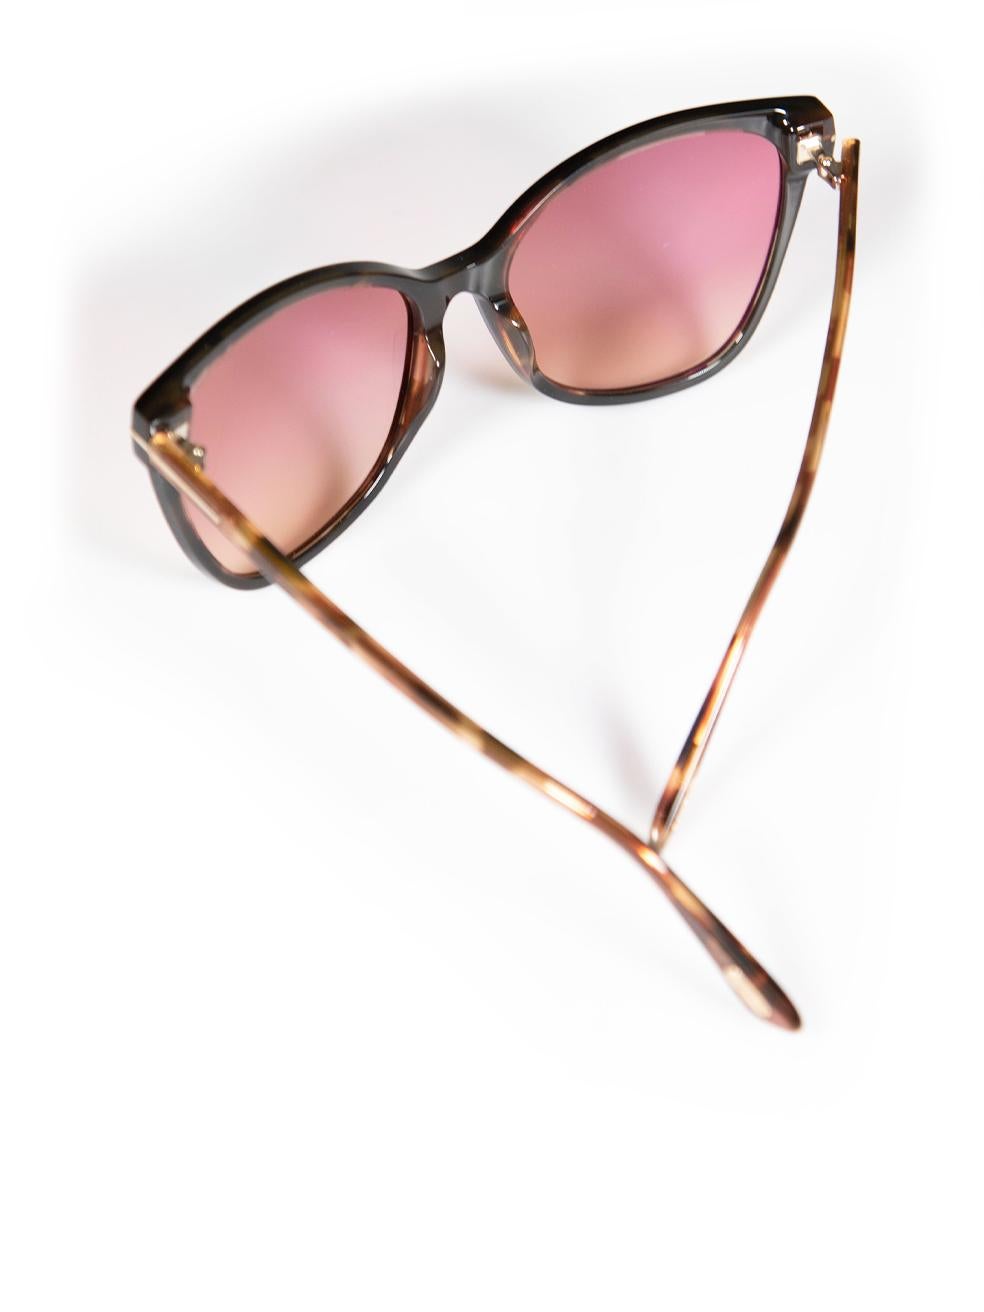 Tom Ford Ani Pink Gradient Cat Eye Sunglasses For Sale 3